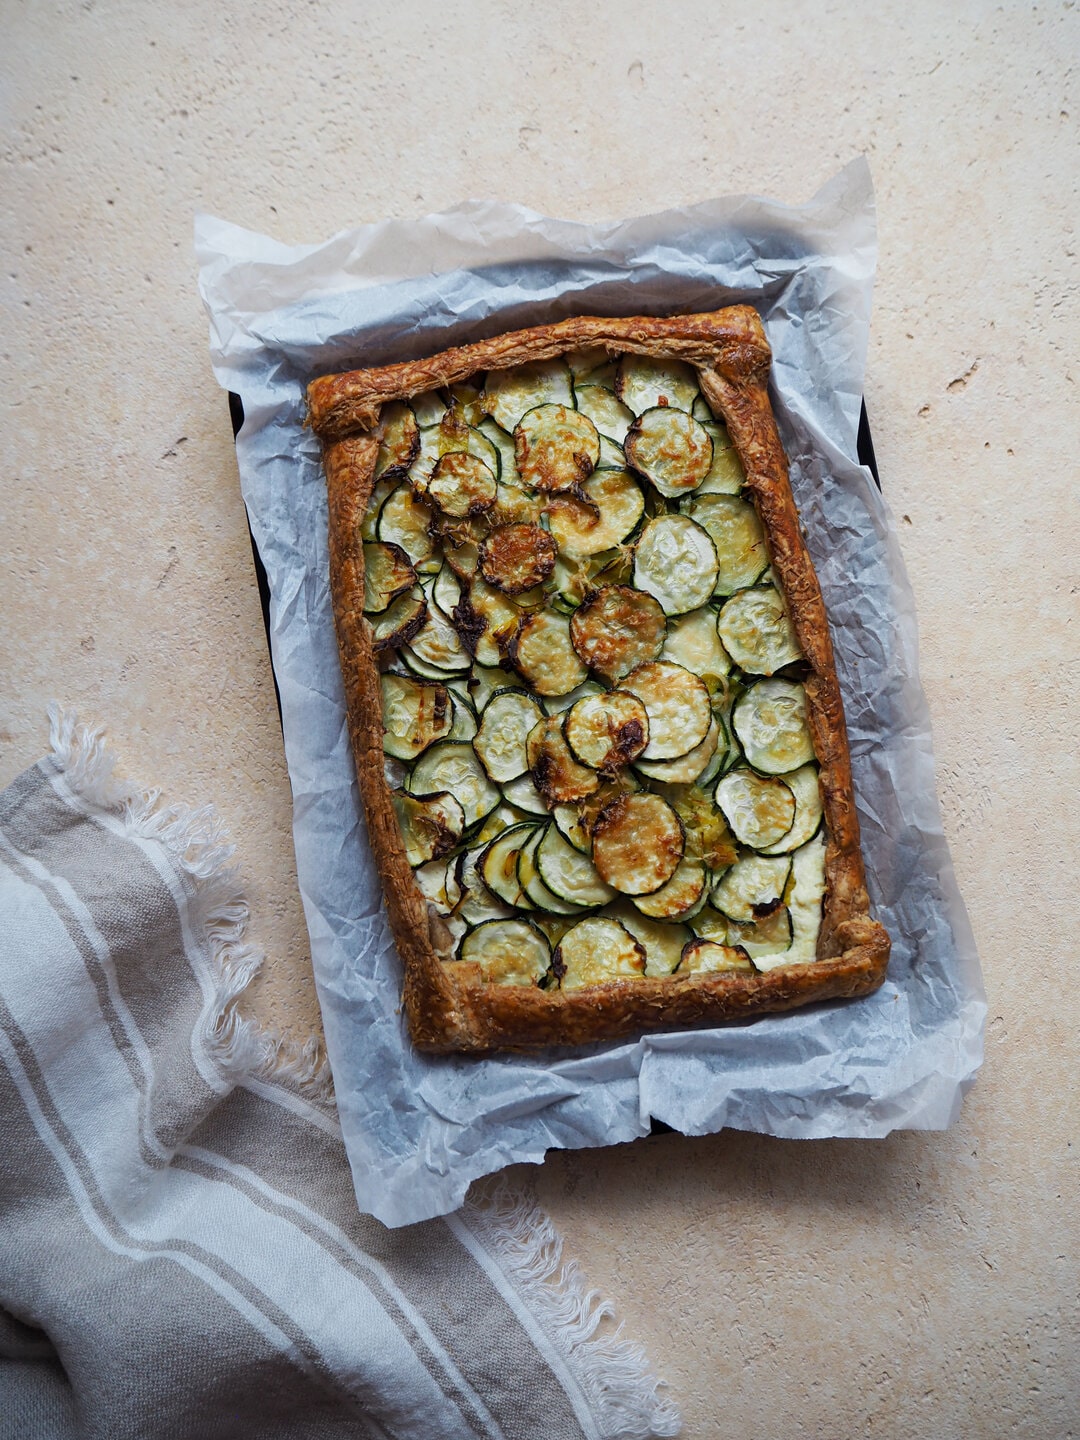 Cooked zucchini and ricotta tart on baking paper, lying on top of a tea towel located in the bottom left corner.